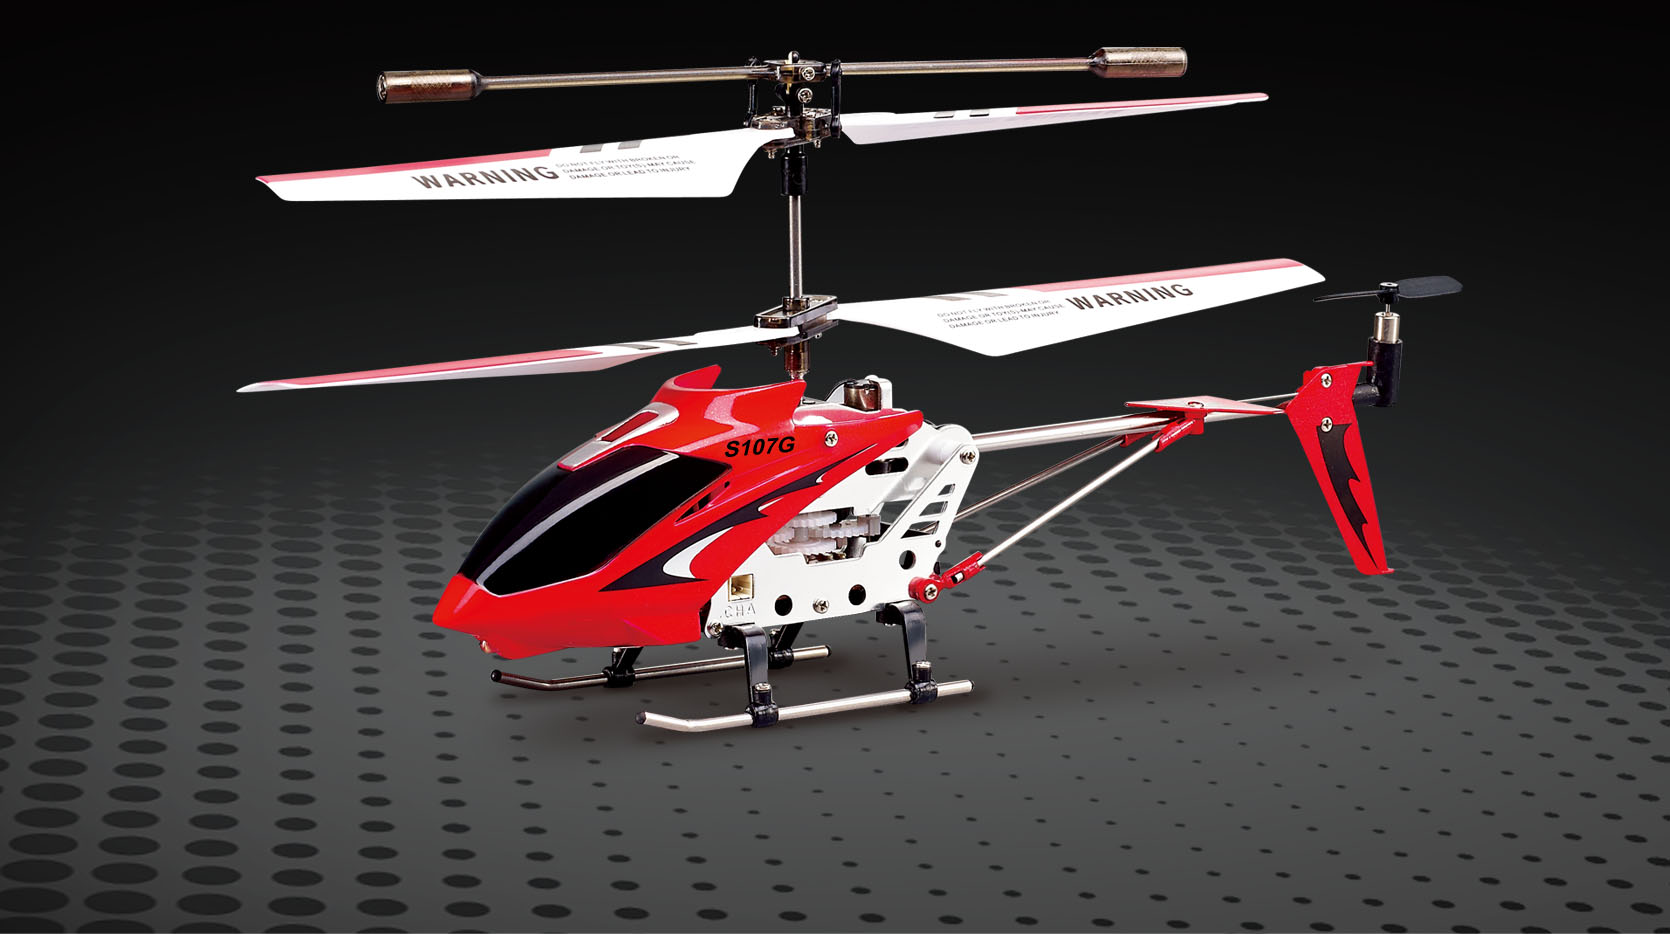 s107g helicopter review